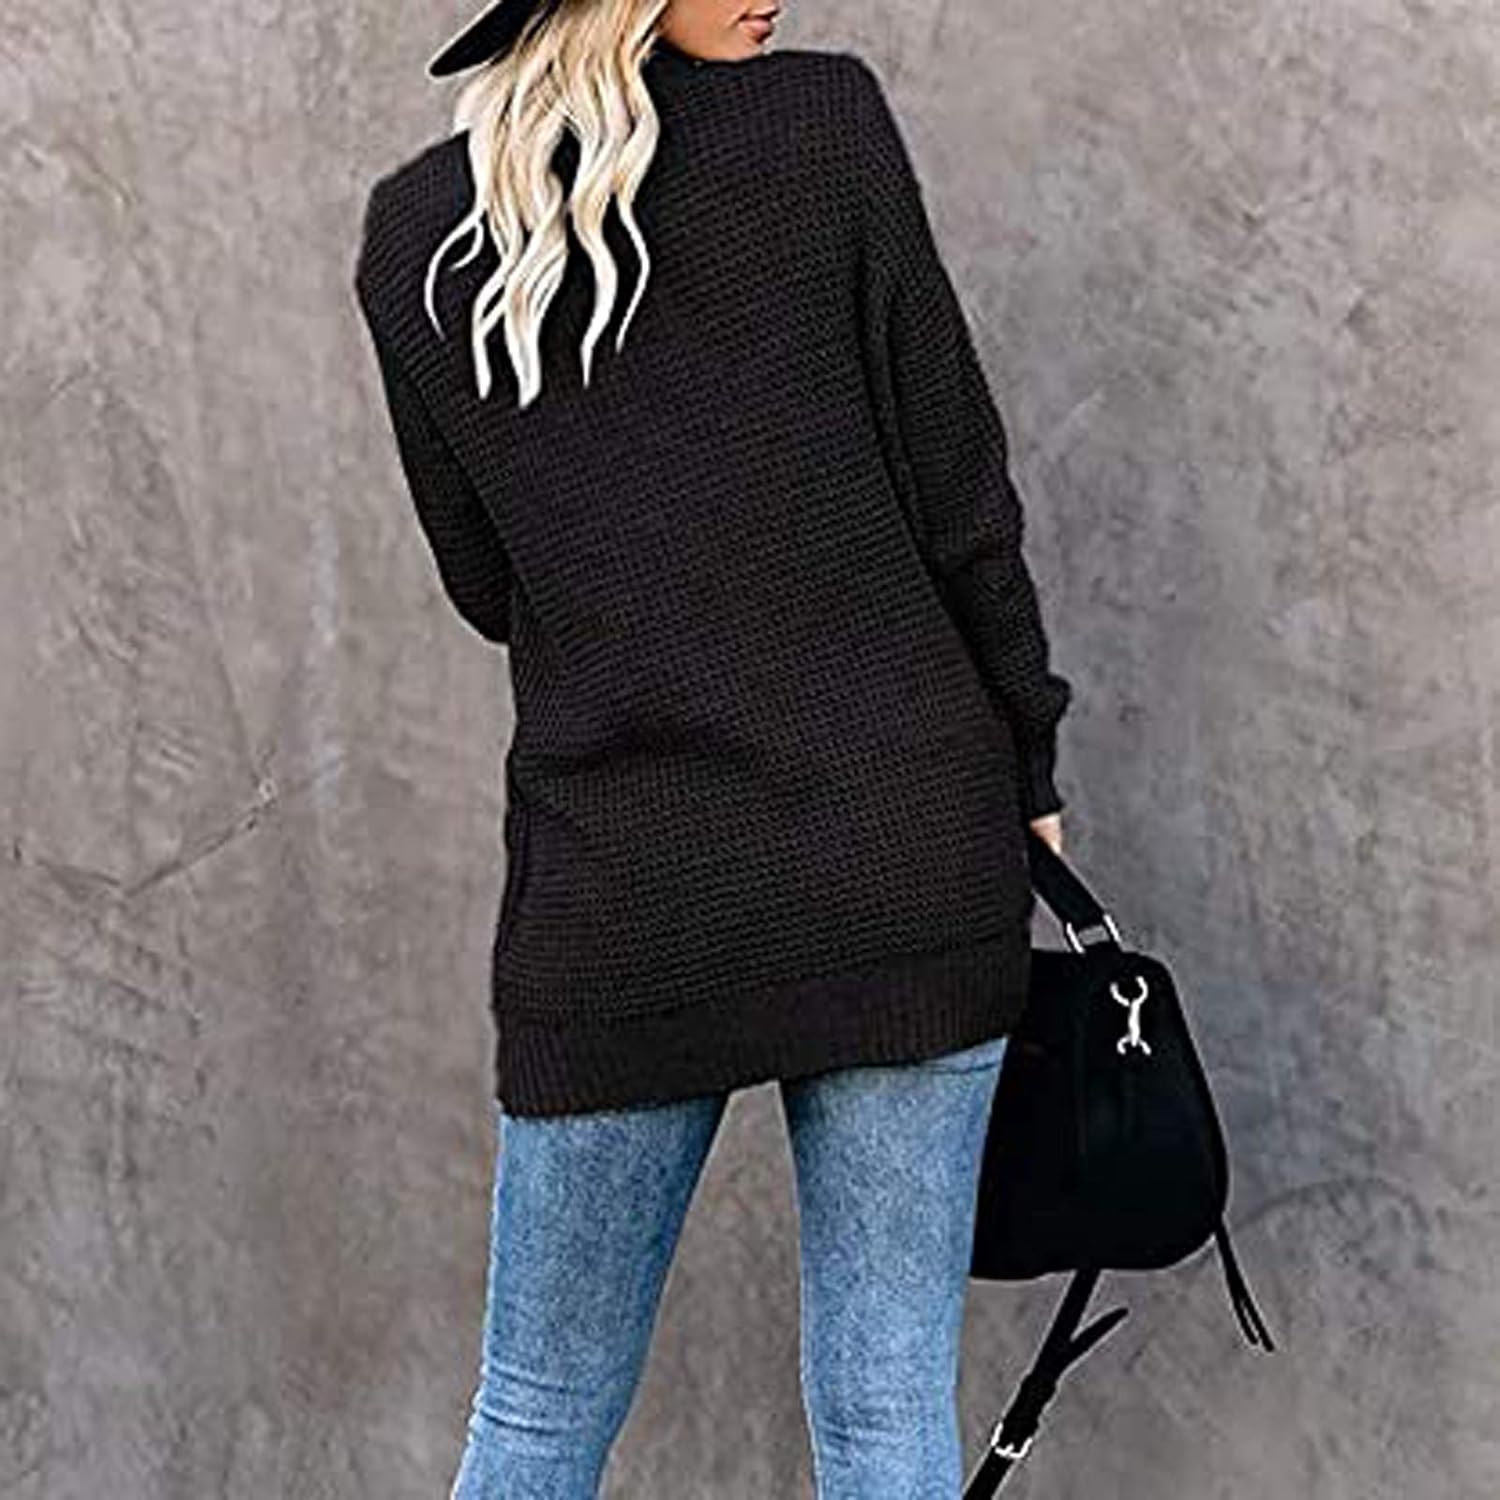 Sweaters for Women, Womens Long Sleeve Open Front Cardigans Chunky Knit Draped Sweaters Outwear with Pockets Cykapu